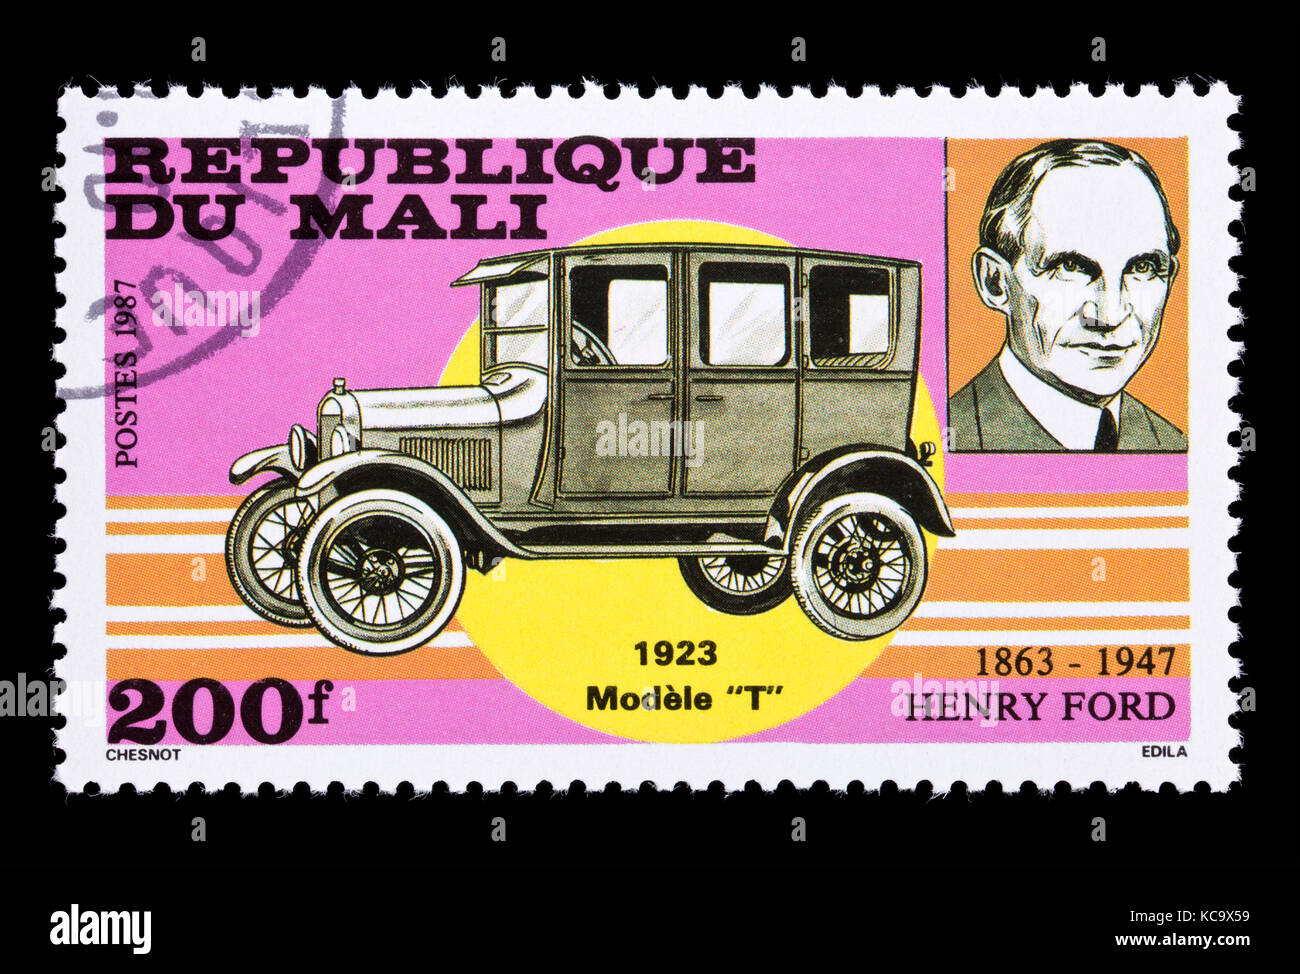 Postage stamp from Mali depicting Henry Ford and a 1923 Model T Ford classic automobile. Stock Photo